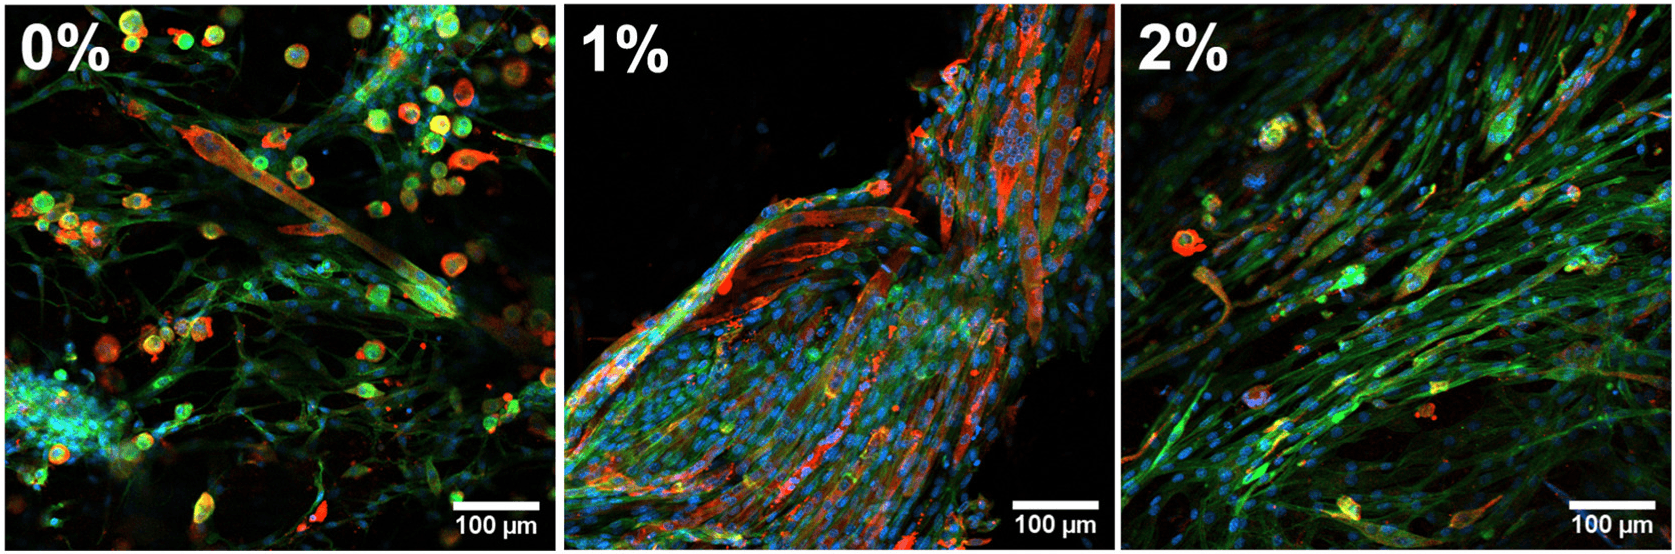 Conditioning of GelMA-AlgMA bioinks for skeletal muscle tissue engineering. Modulation of GelMA-AlgMA bioink mechanical properties of GelMA with 0 %,1 % and 2 % AlgMA (n = 9). Confocal images of C2C12 cells after 14 days of differentiation with stained MHC (red), F-actin (green) and nuclei (blue). Actin was stained with Phalloidin-iFluor 488. Scale bar = 100 μm. Source: <b>3D bioprinted functional skeletal muscle models have potential applications for studies of muscle wasting in cancer cachexia</b> by Andrea García-Lizarribar et.al., <em>Biomaterials Advances</em> April 2023.